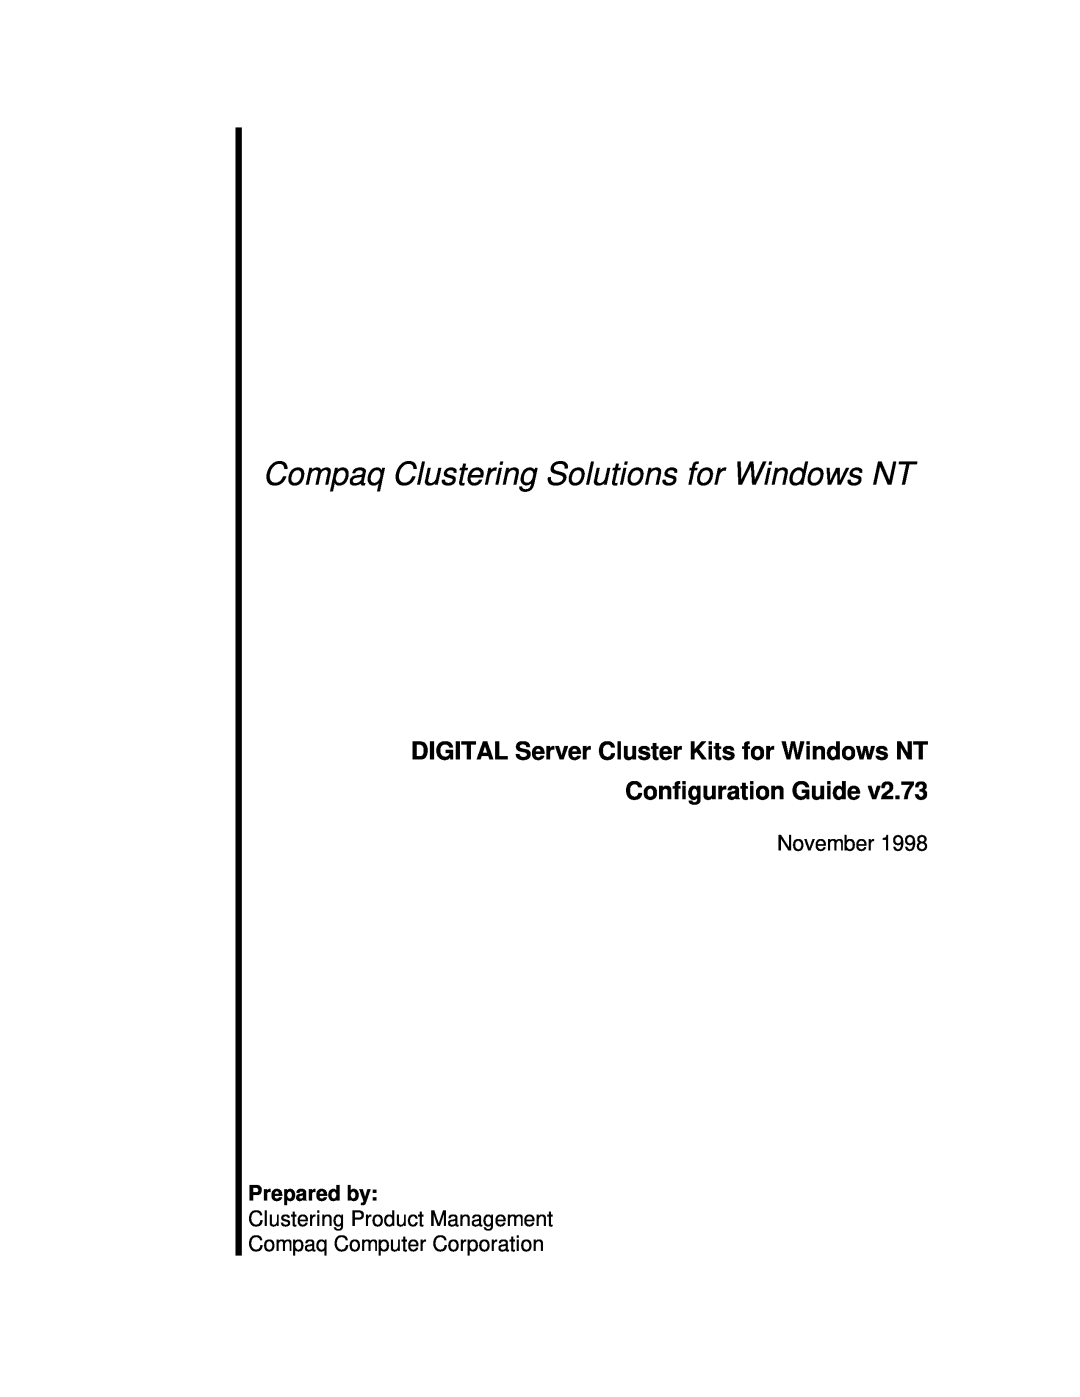 Compaq manual DIGITAL Server Cluster Kits for Windows NT Configuration Guide, Prepared by, November 